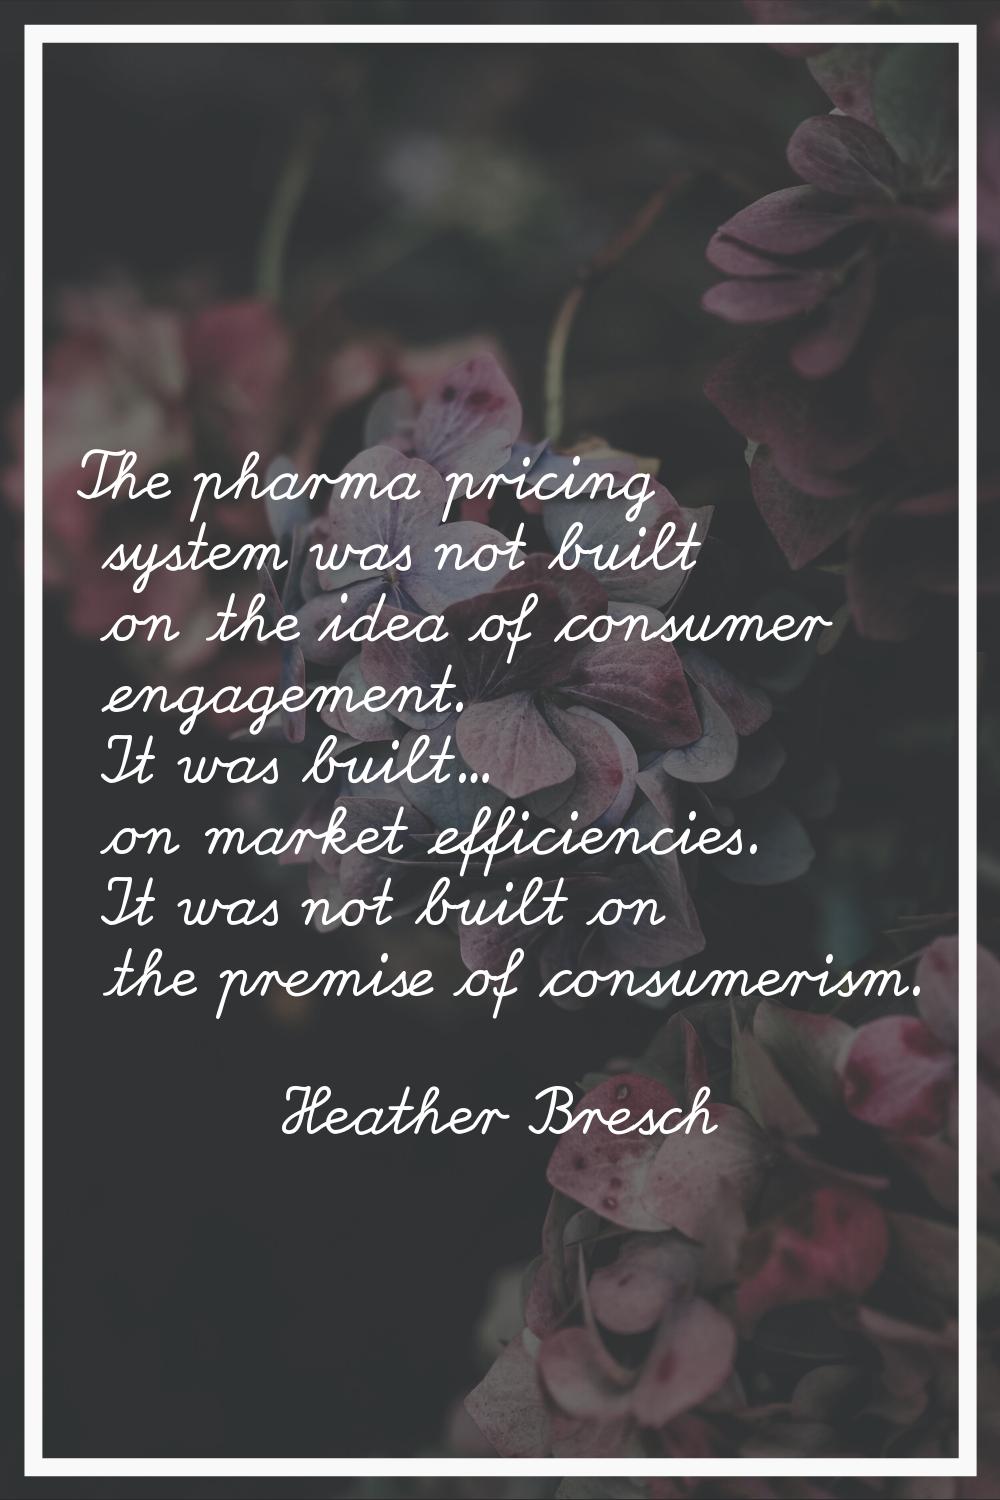 The pharma pricing system was not built on the idea of consumer engagement. It was built... on mark